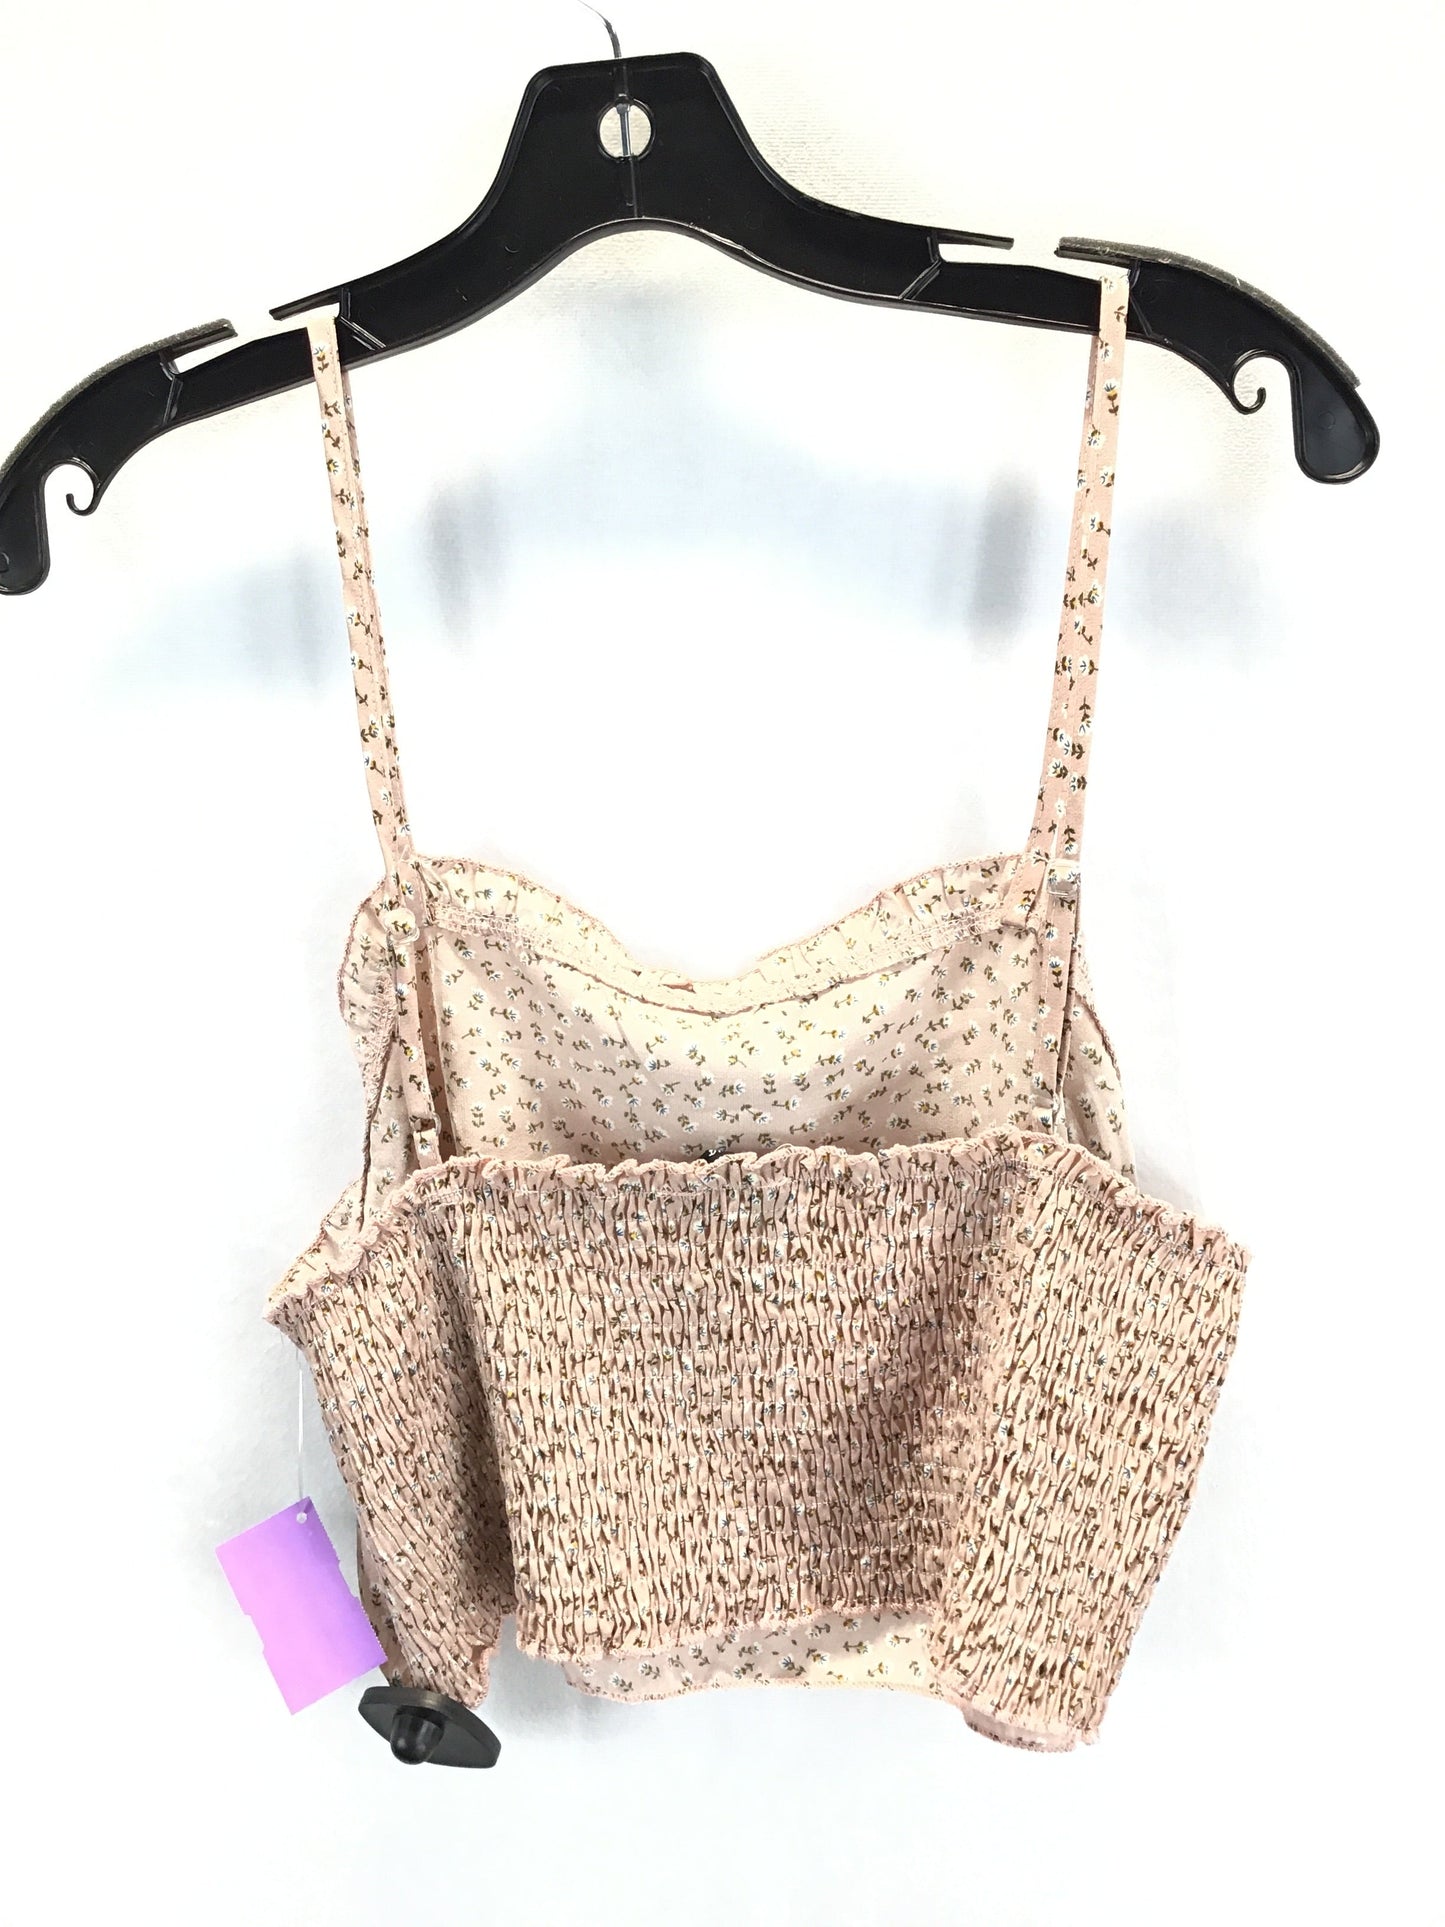 Top Sleeveless By Shein  Size: 1x